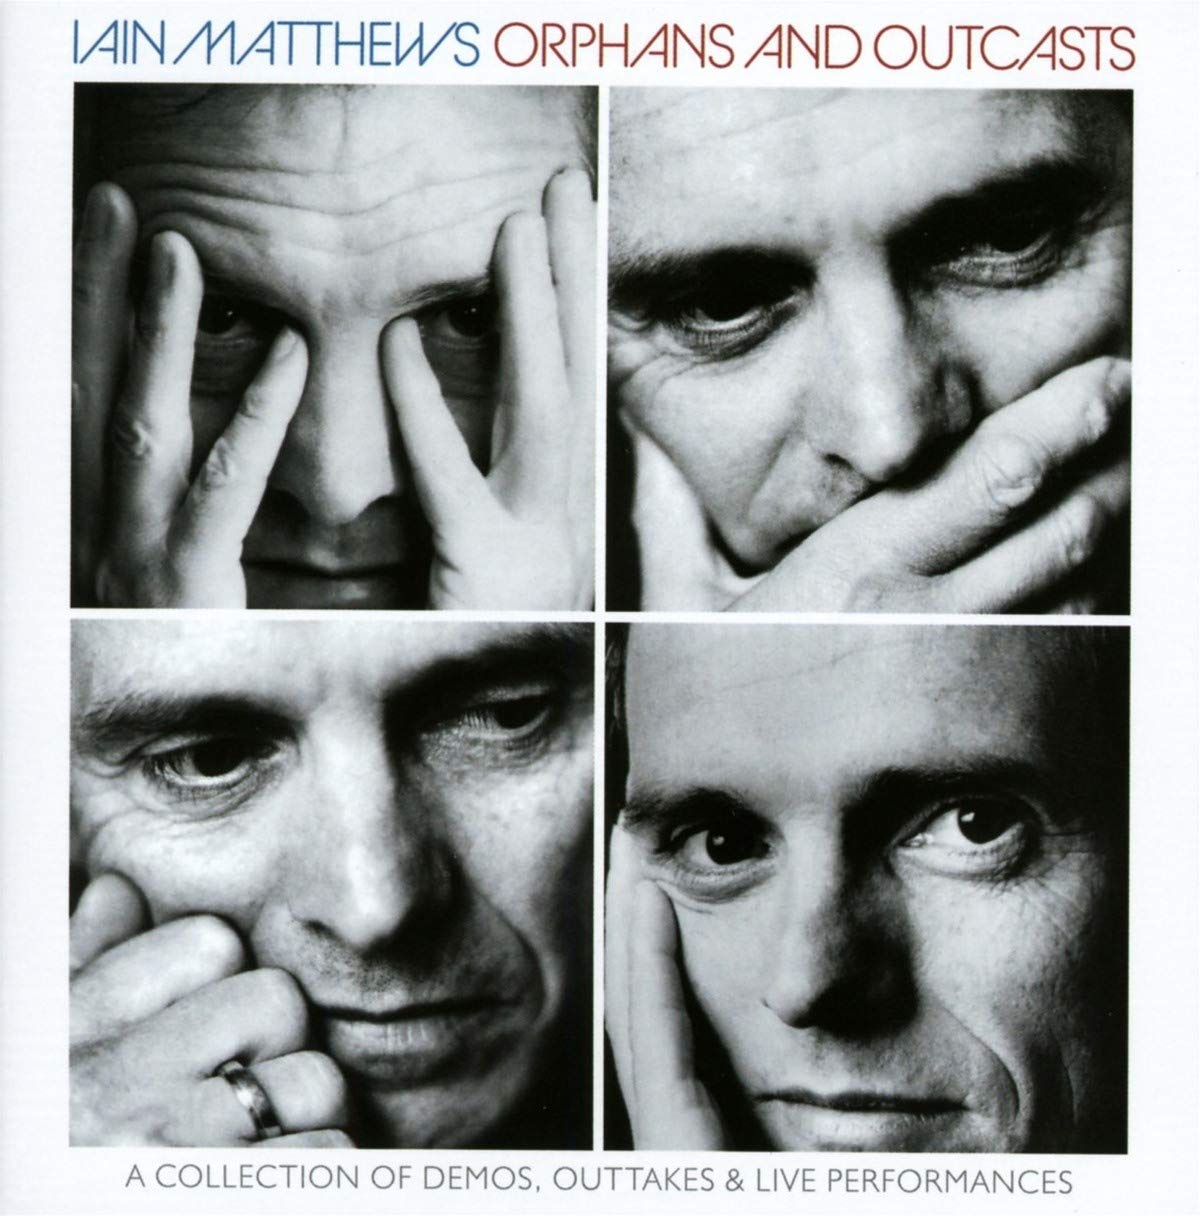 IAIN MATTHEWS / ORPHANS AND OUTCASTS: A COLLECTION OF DEMO'S, OUTTAKES & LIVE PERFORMANCES VOLUMES I-IV (4CD BOX)